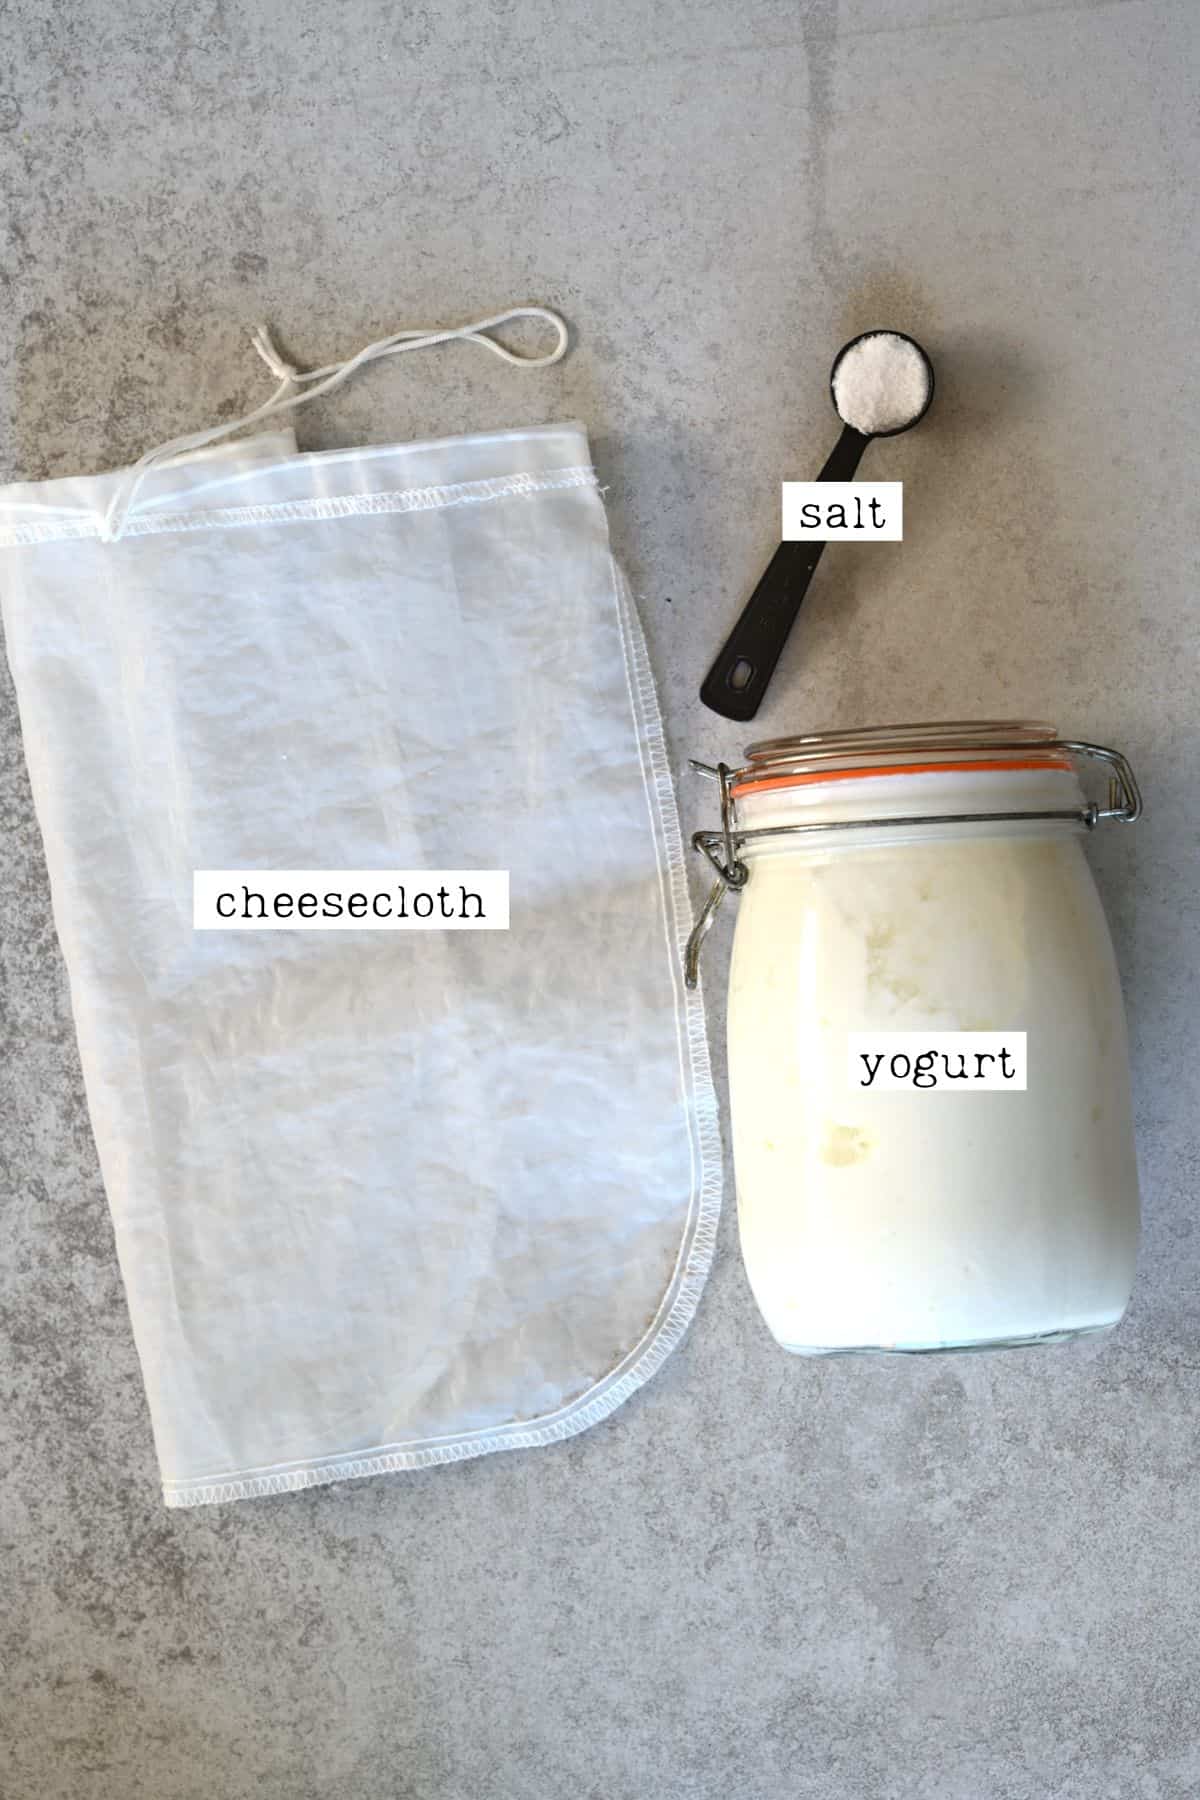 Ingredients and tools to make labneh